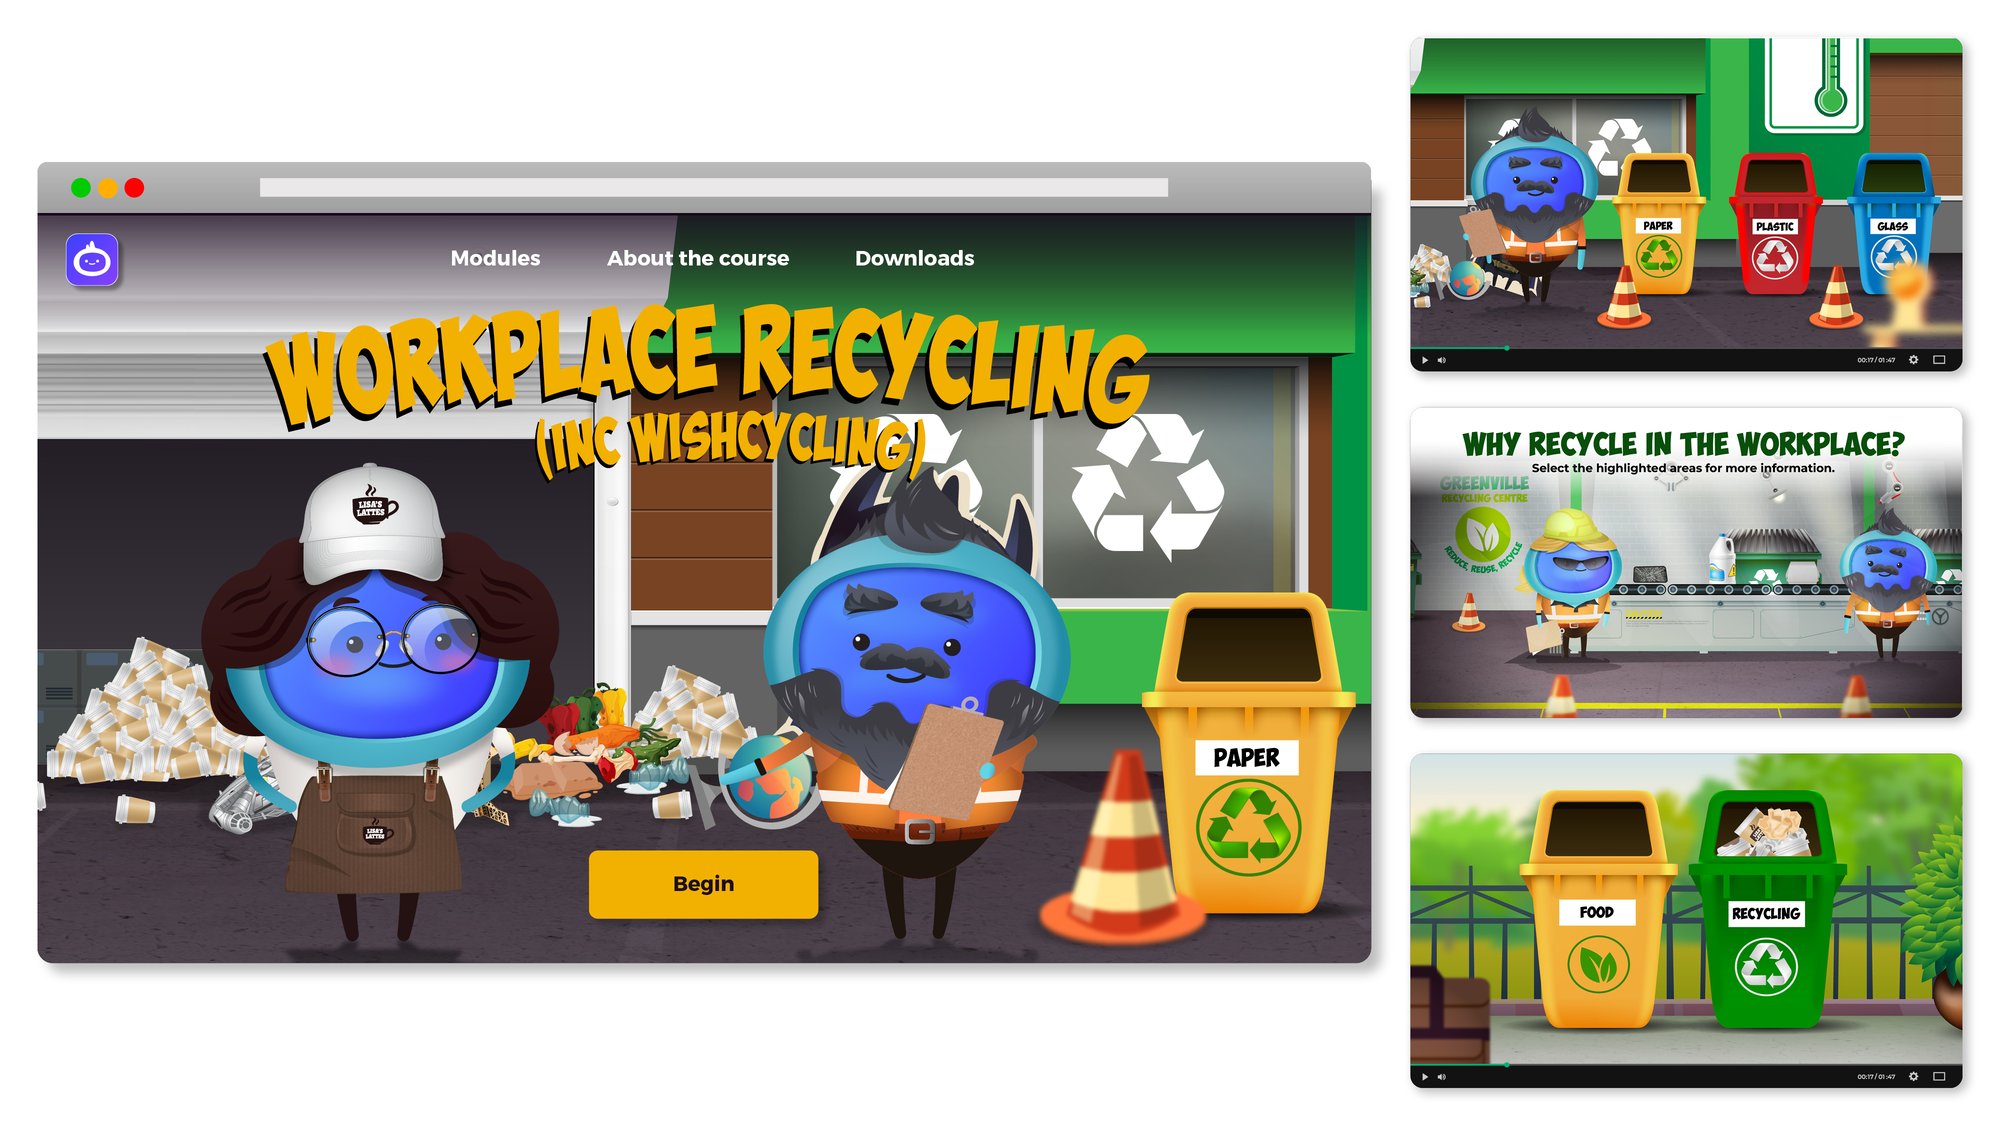 iAM 00341 - Workplace Recycling (inc Wishcycling) - Landing page